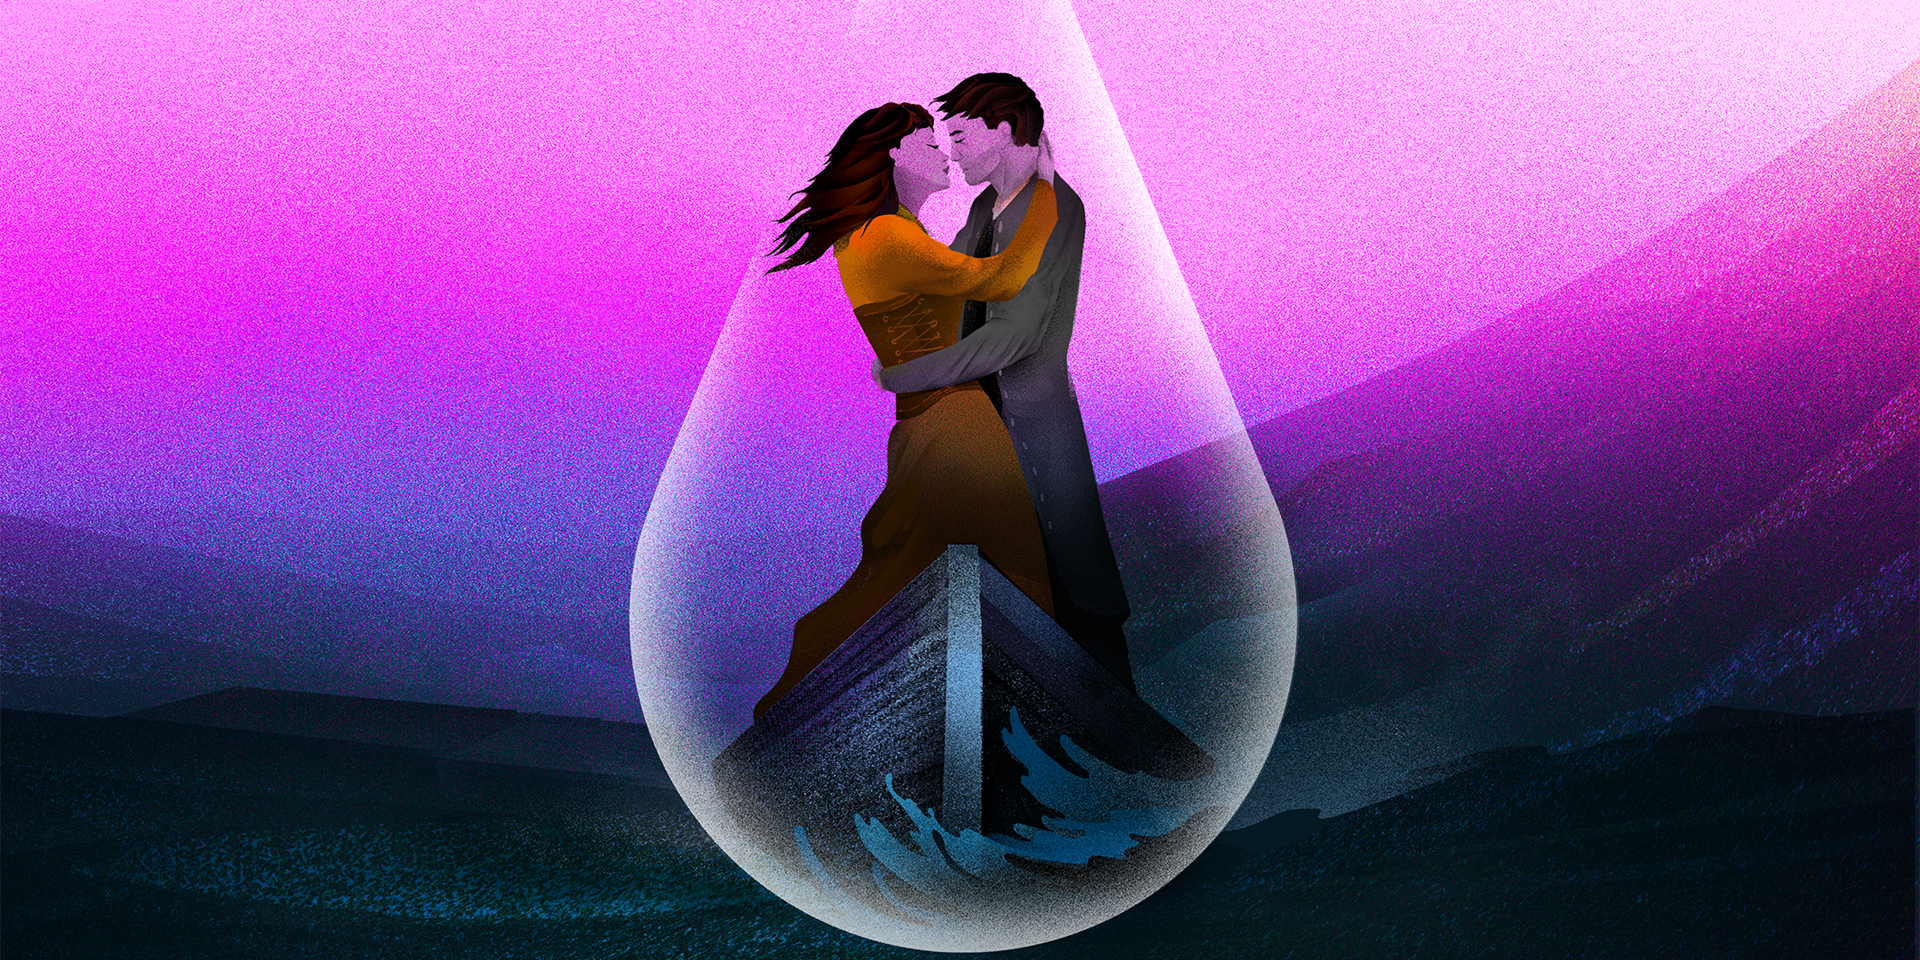 Tristan and Isolde graphic of them embracing within a droplet of water